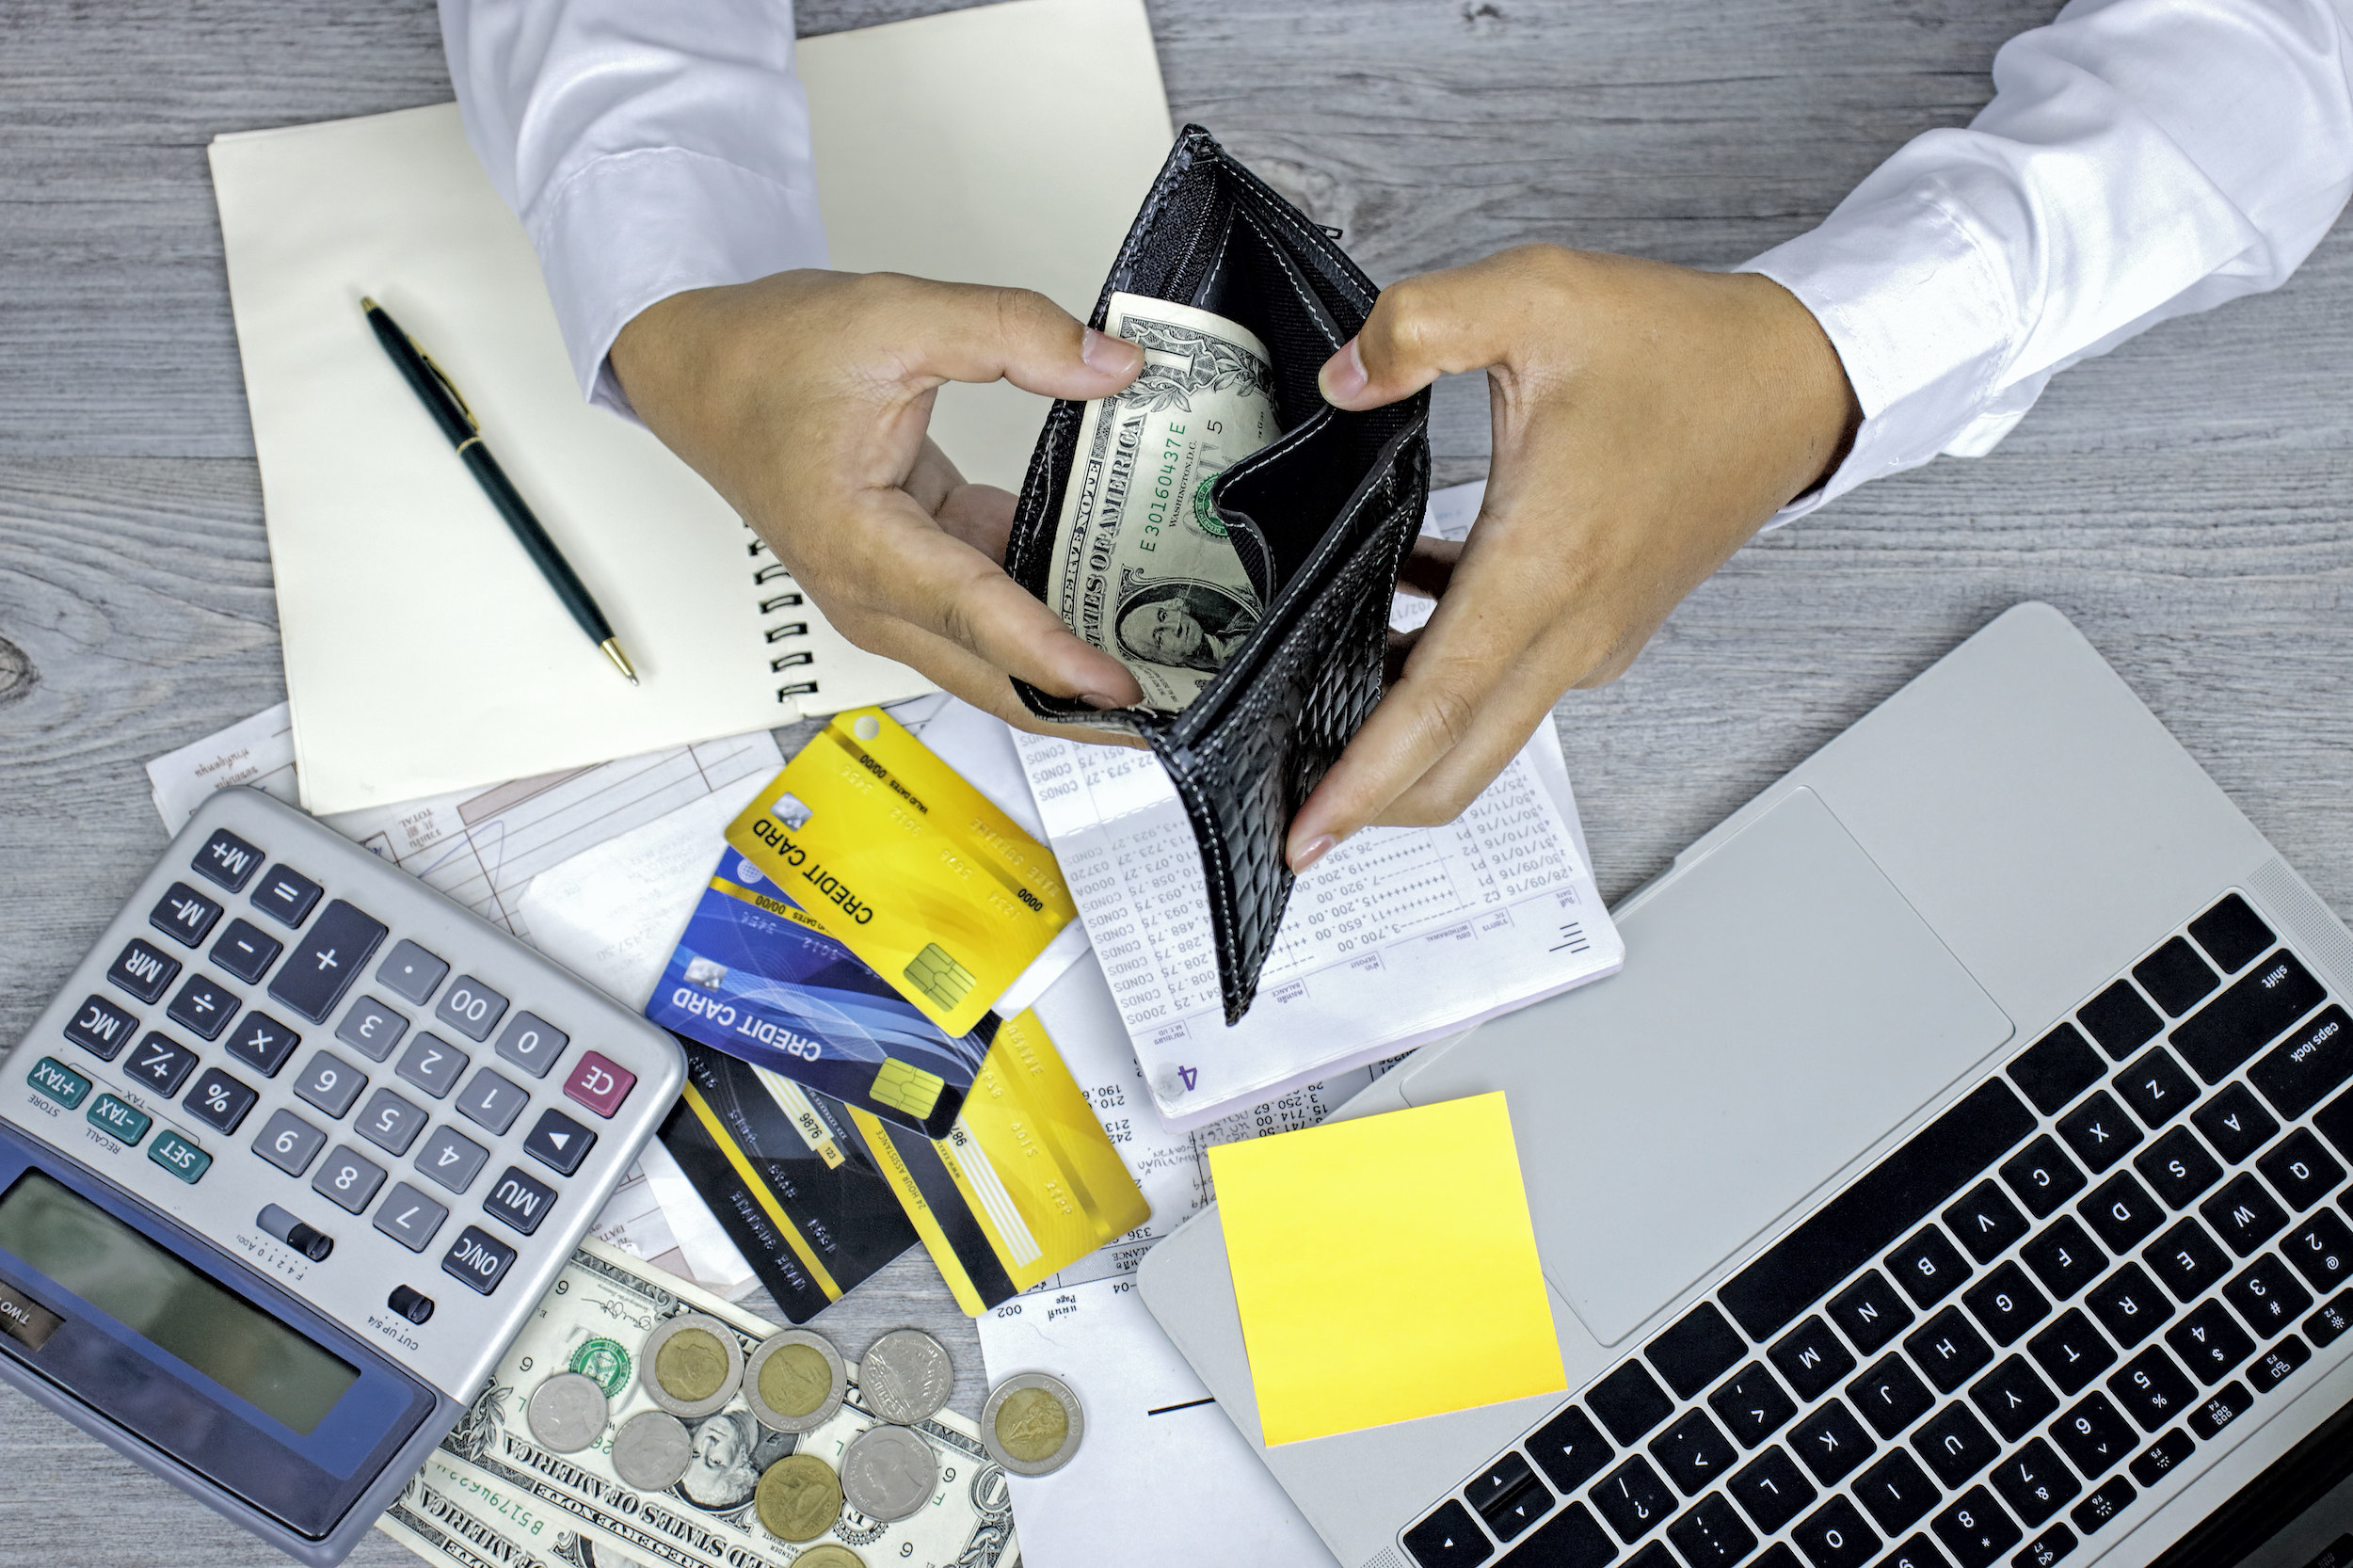 A person holding an open billfold above a desktop with a laptop, calculator, credit cards, bank statement, and cash